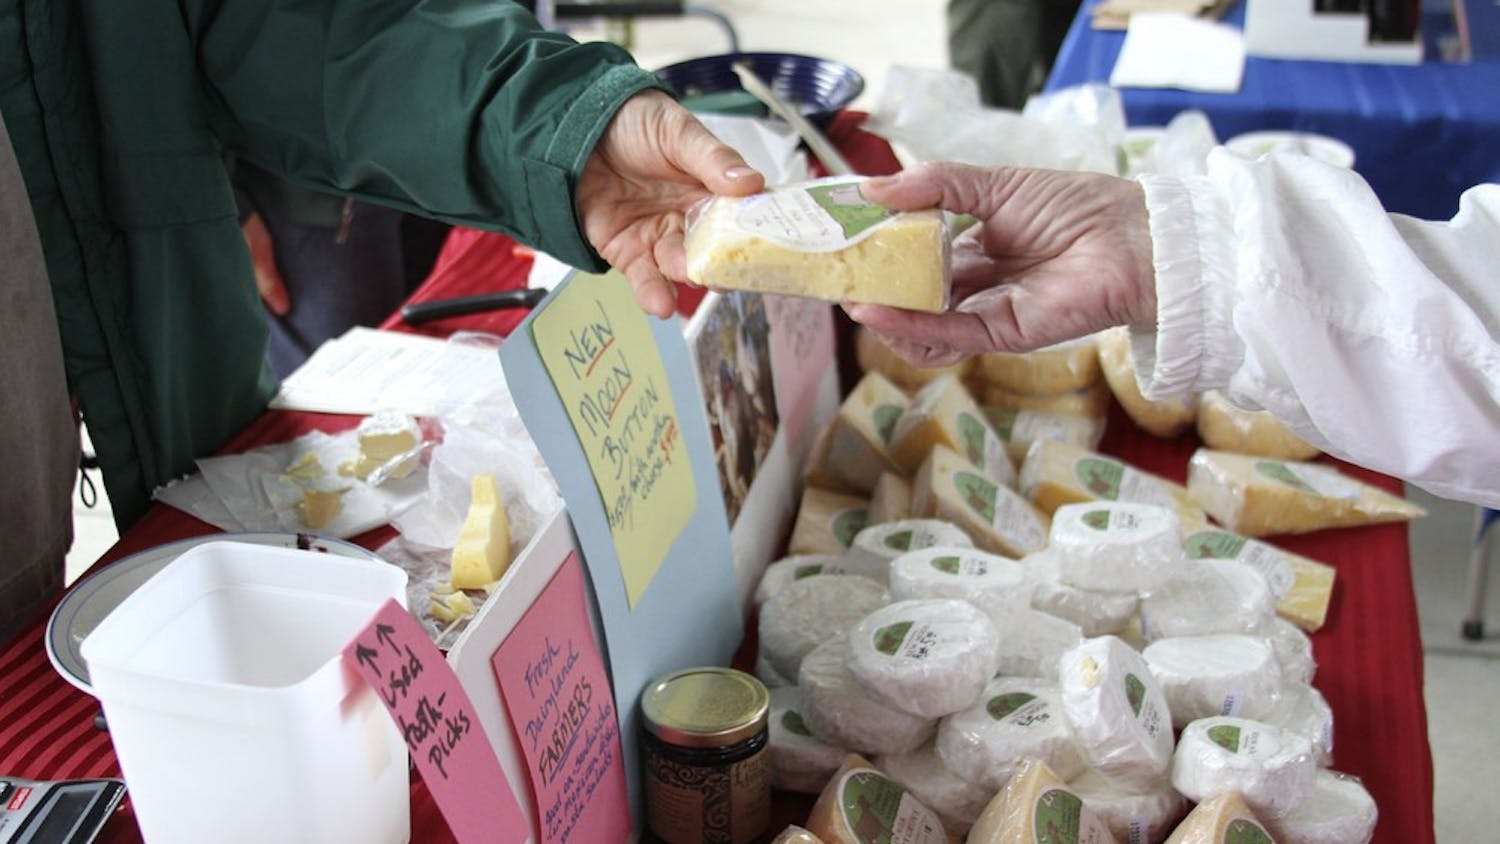 Chapel Hill Creamery has been at the Carrboro Farmer's Market for 12 years. 